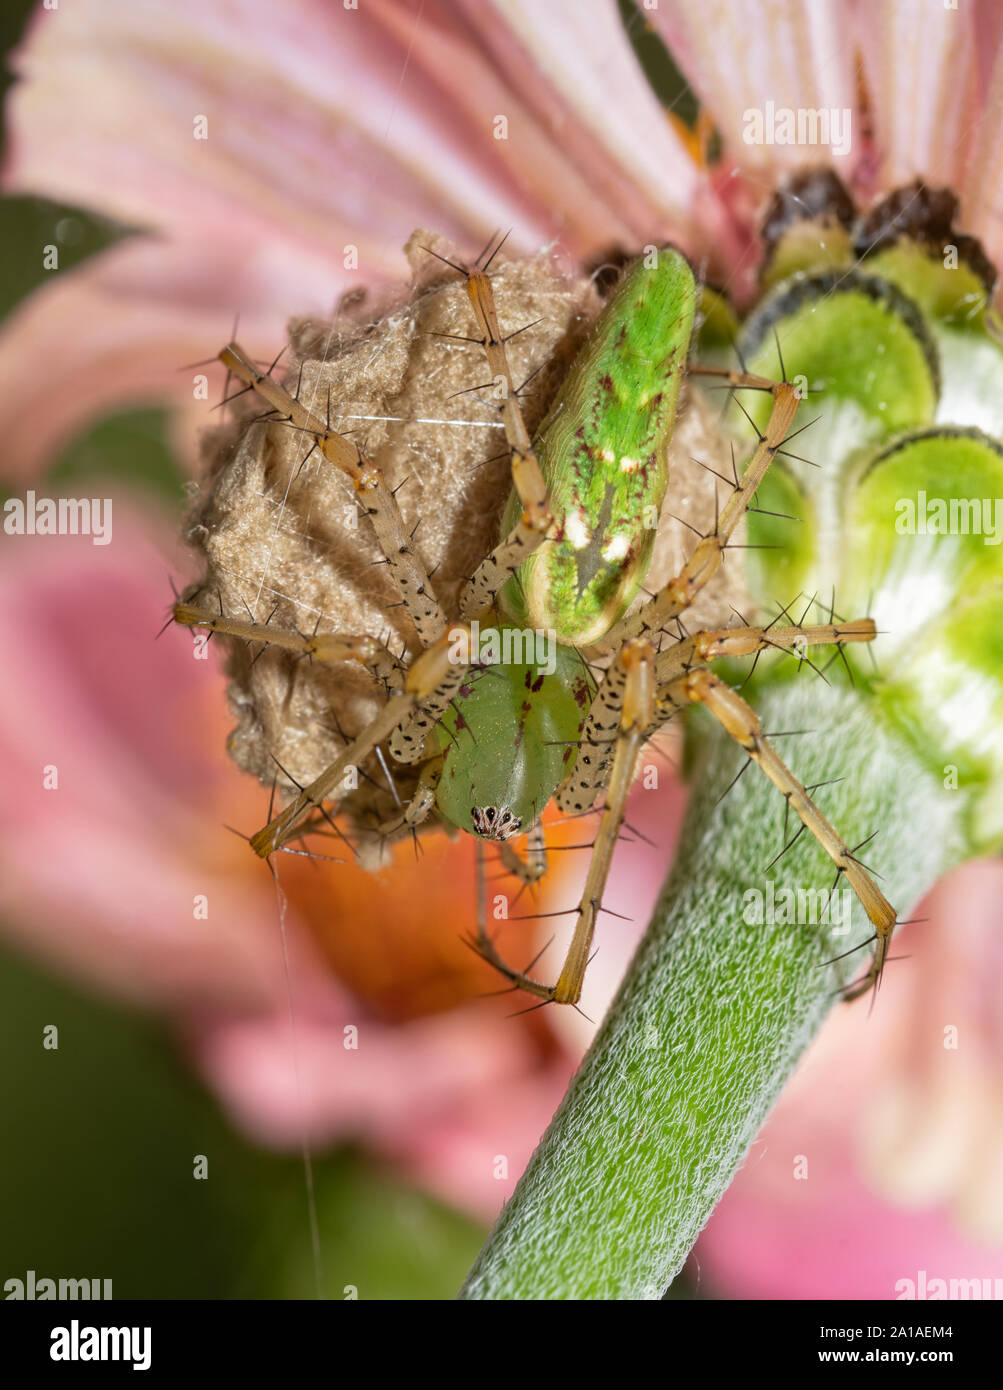 Female Peucetia viridans, Green Lynx Spider sitting atop of her egg sac, protecting it, on the underside of a pink Zinnia flower Stock Photo